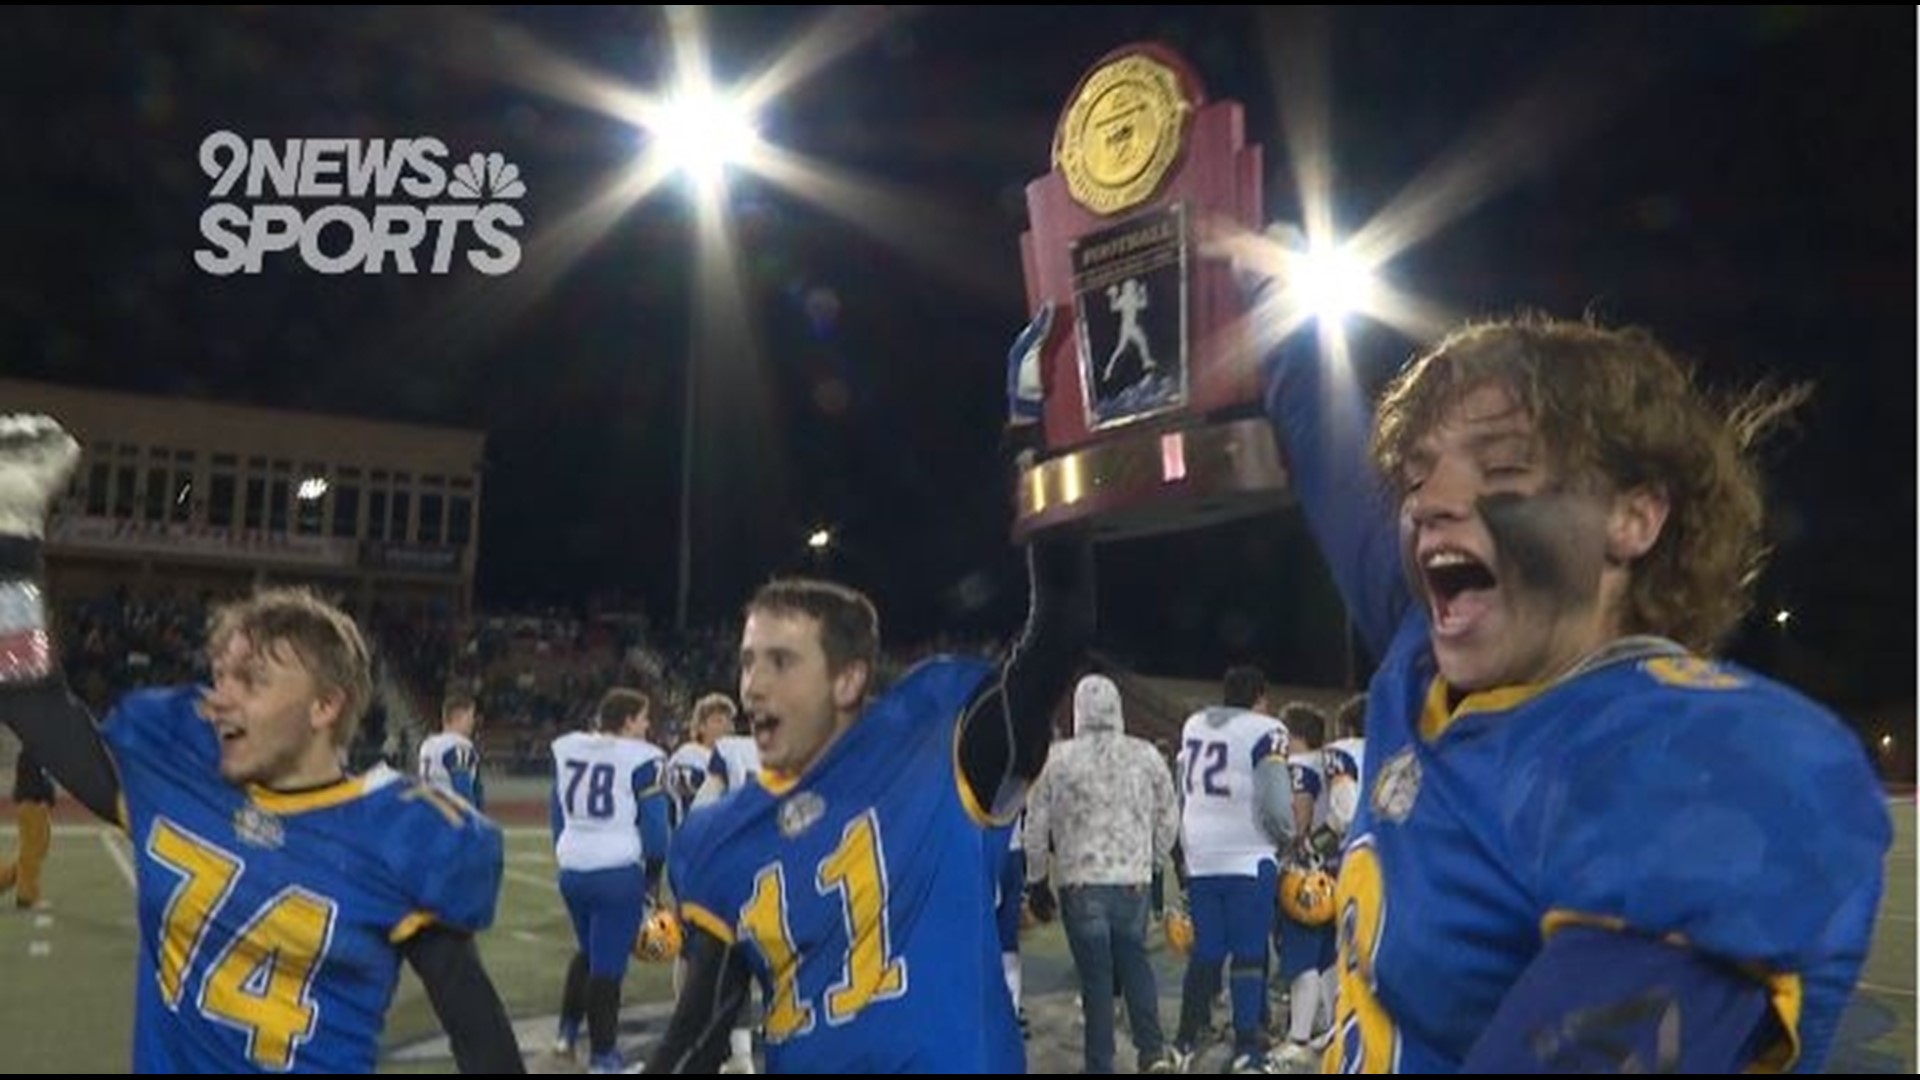 Watch the extended highlights from the 8-man state championship game!